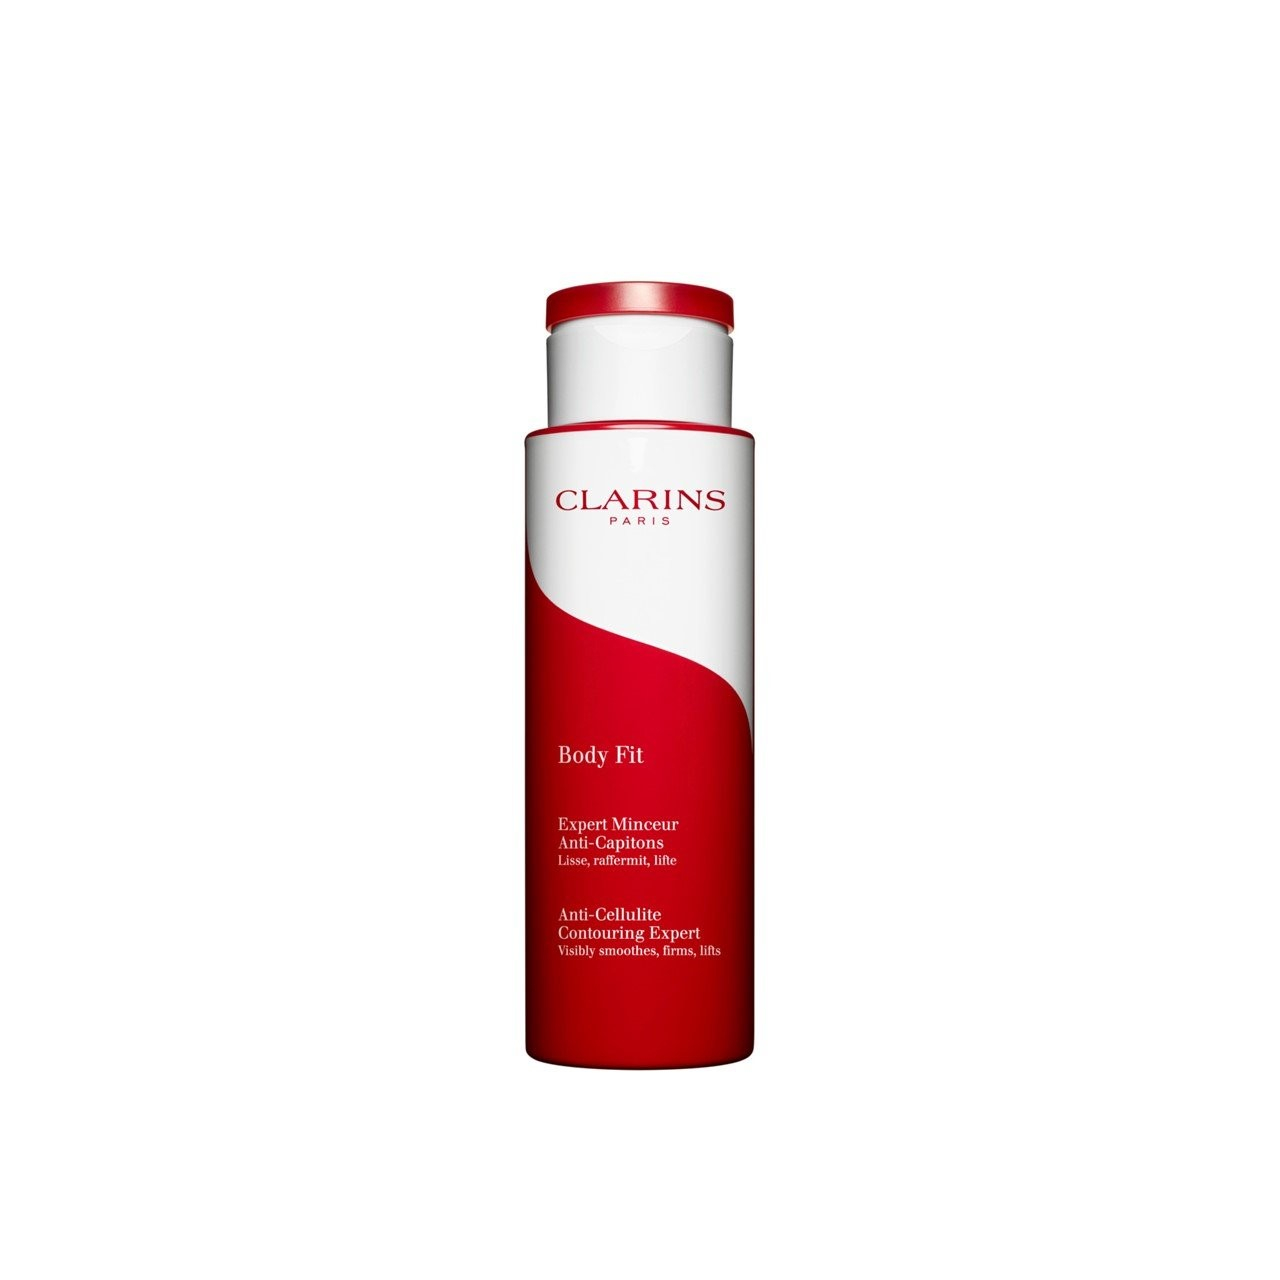 Buy Clarins Body Fit Anti-Cellulite Contouring Expert 200ml · Canada